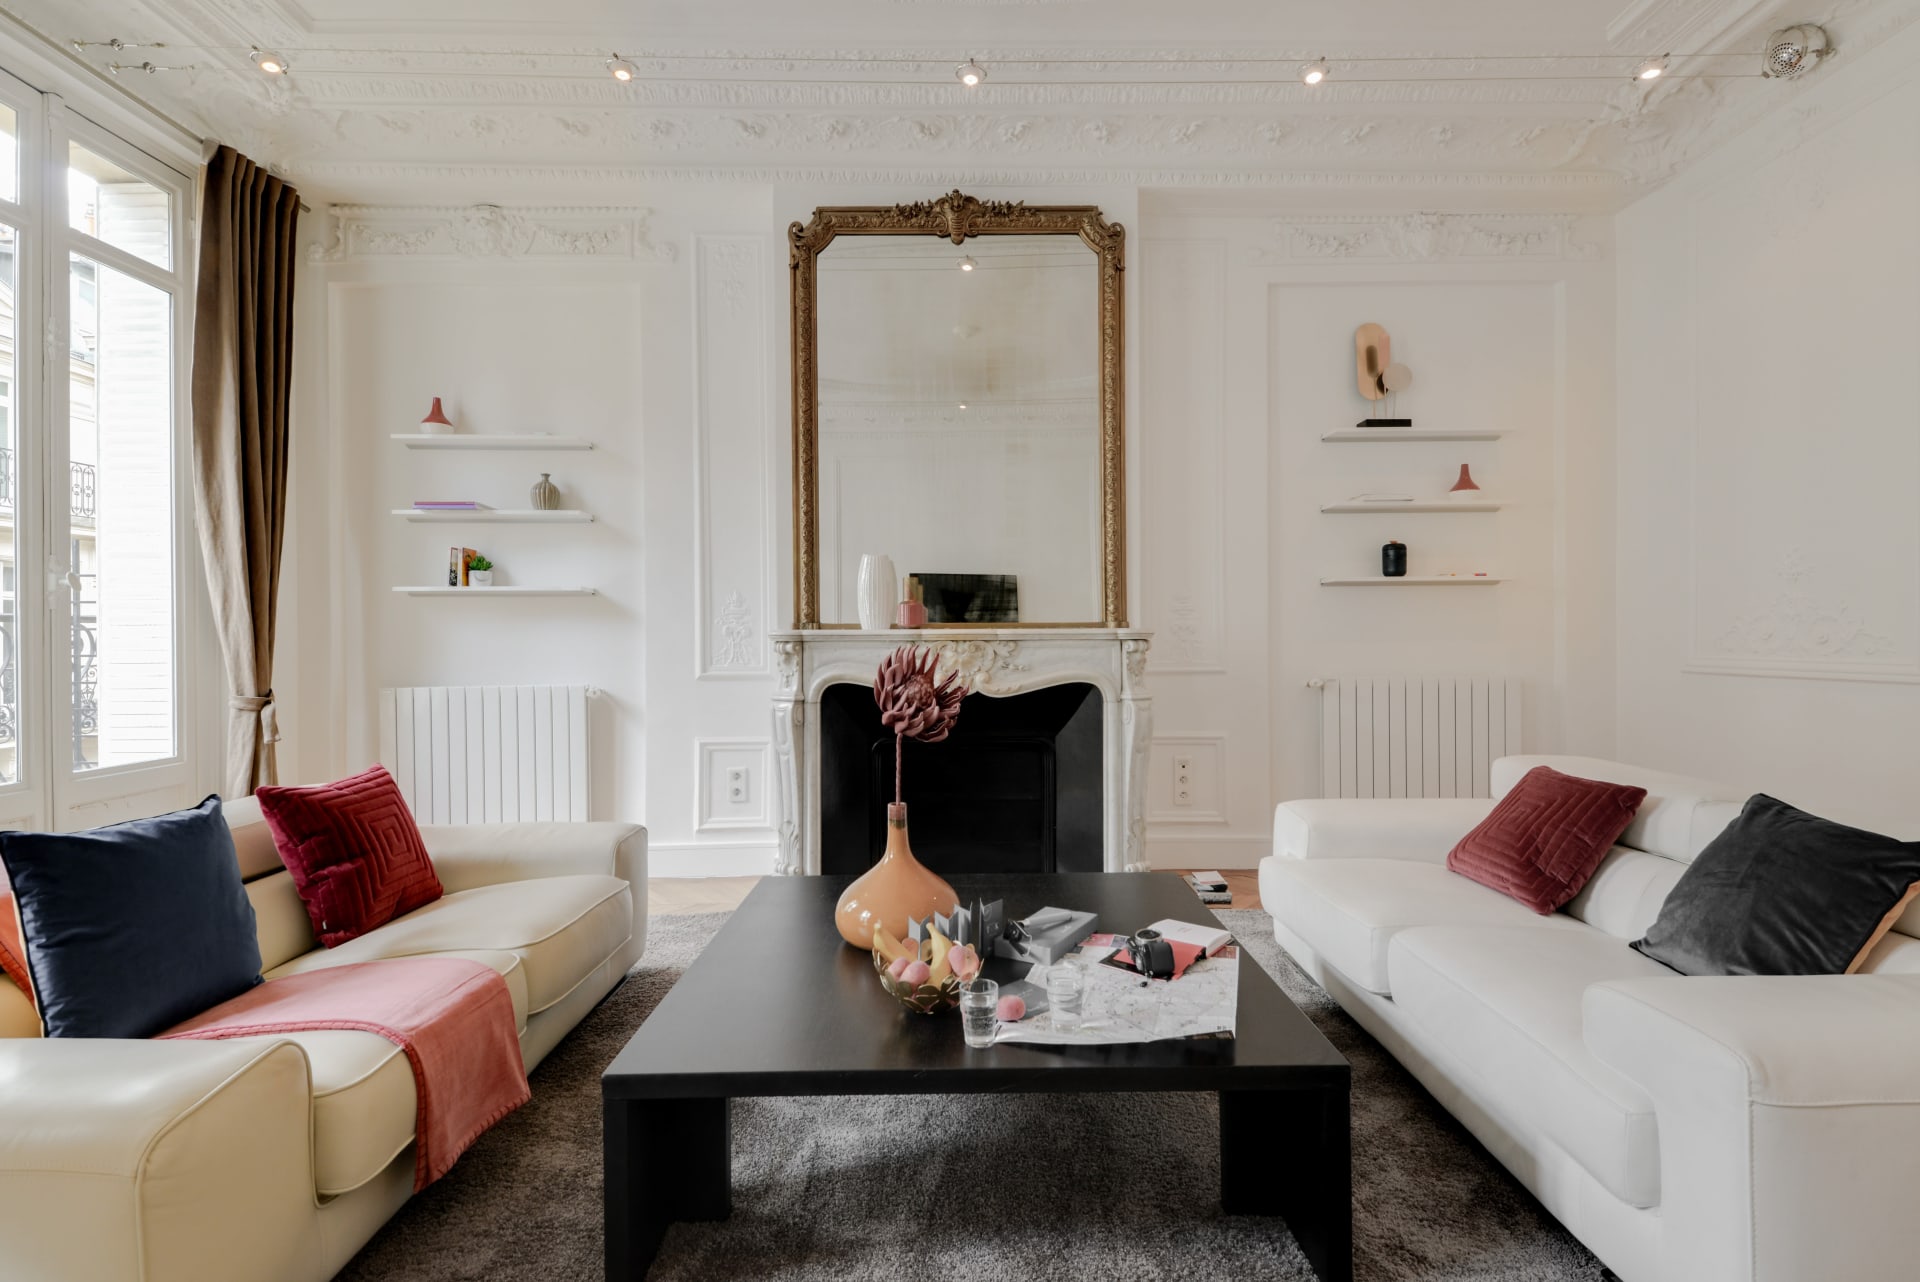 Property Image 2 - One bedroom stylish apartment in the heart of Champs-�lys�es, Paris.